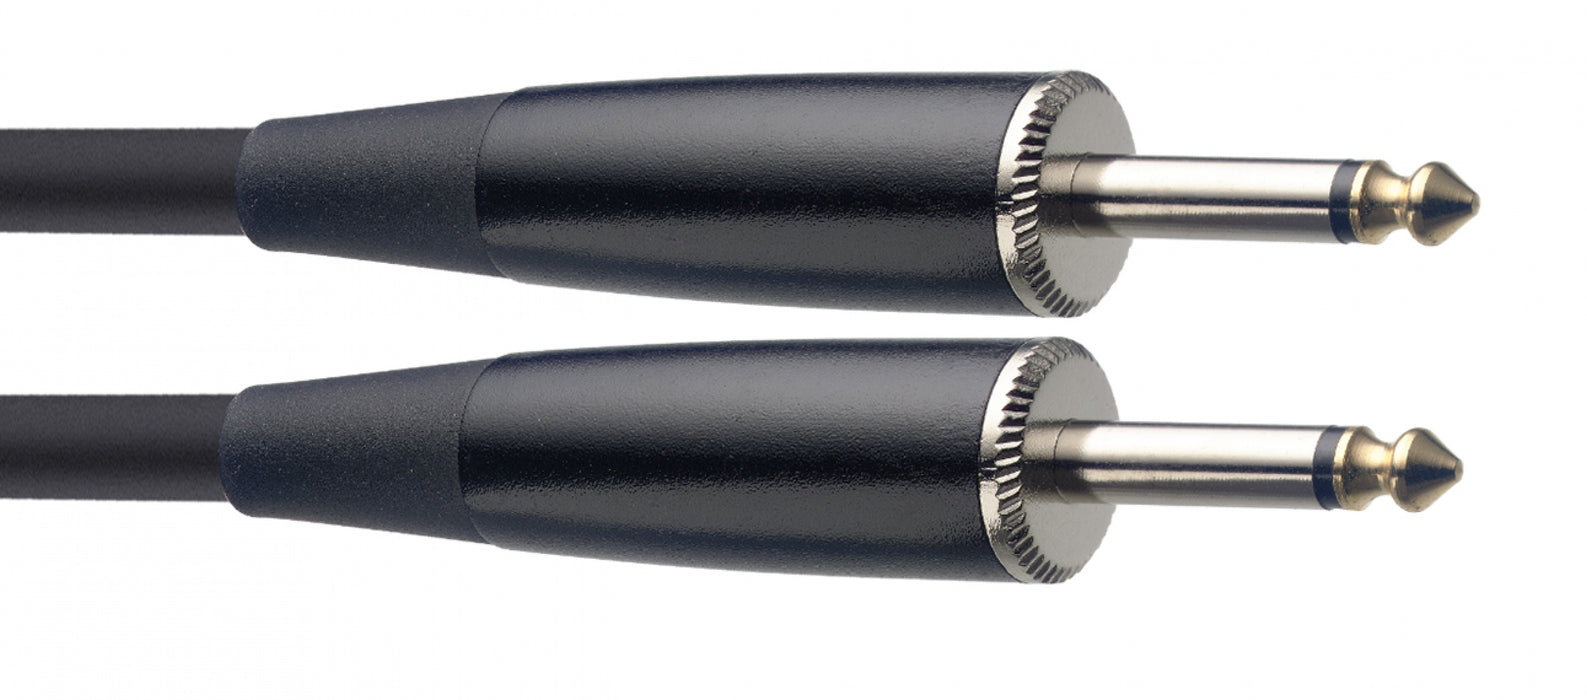 Stagg Speaker Cable - Jack to Jack - 33ft/10m